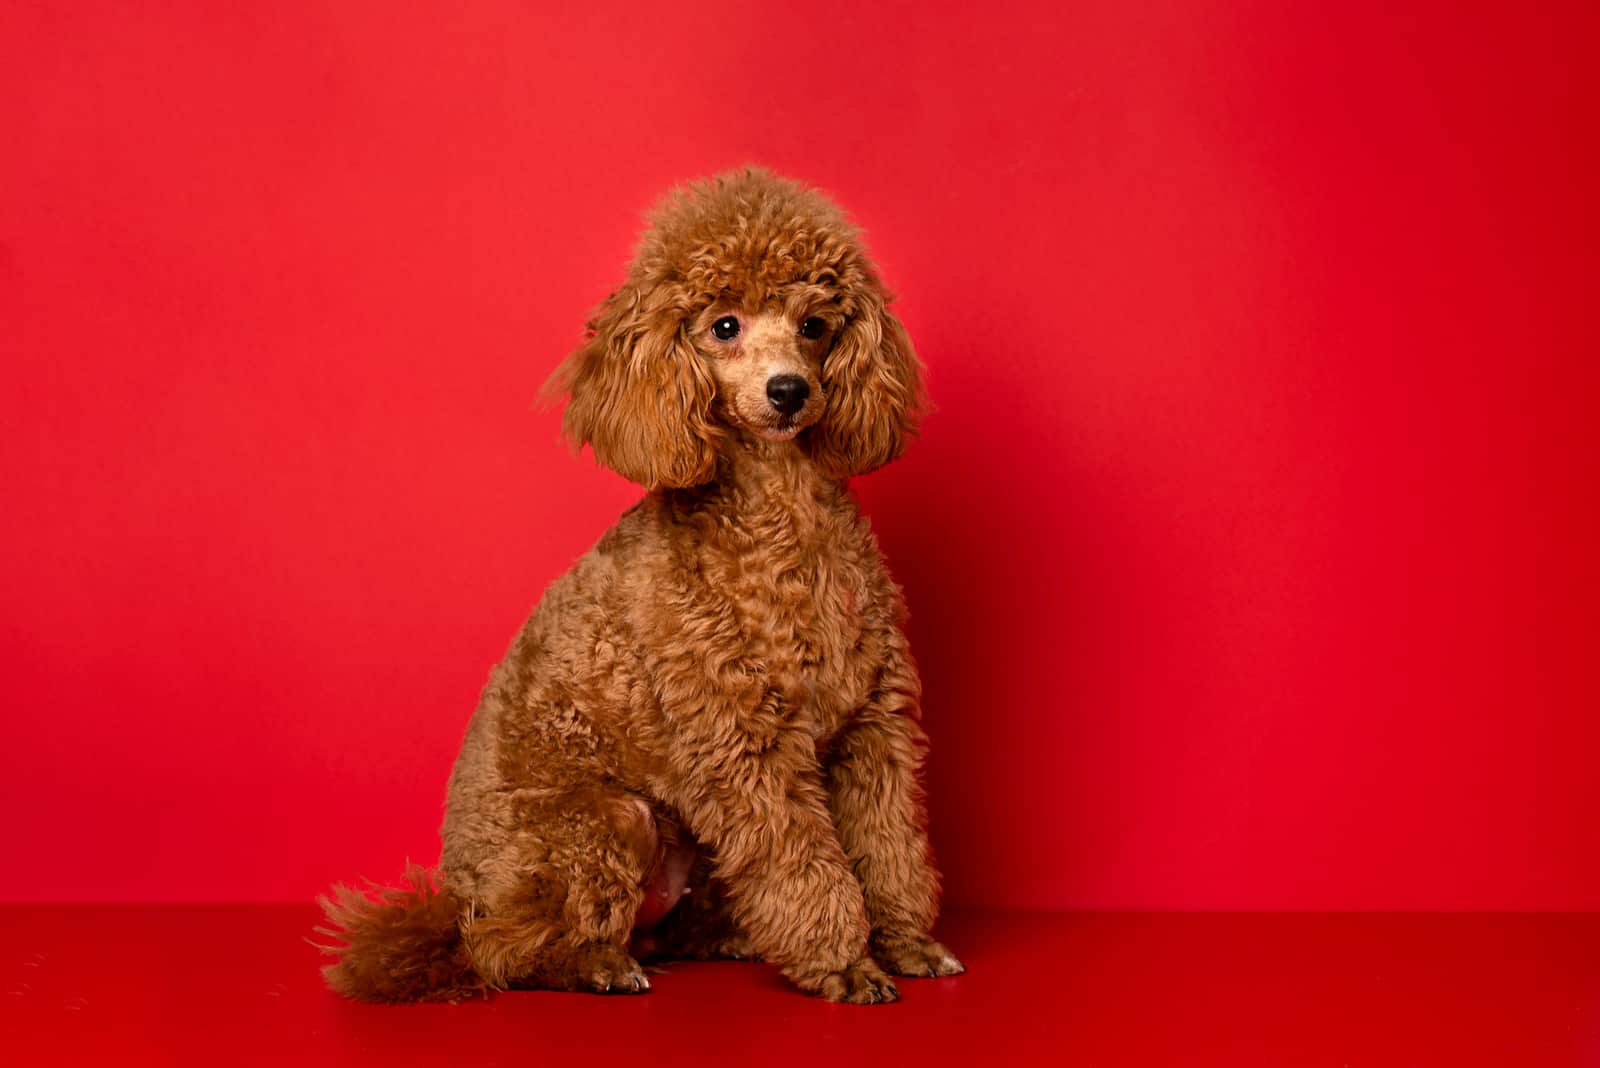 Cute little red poodle on a red background